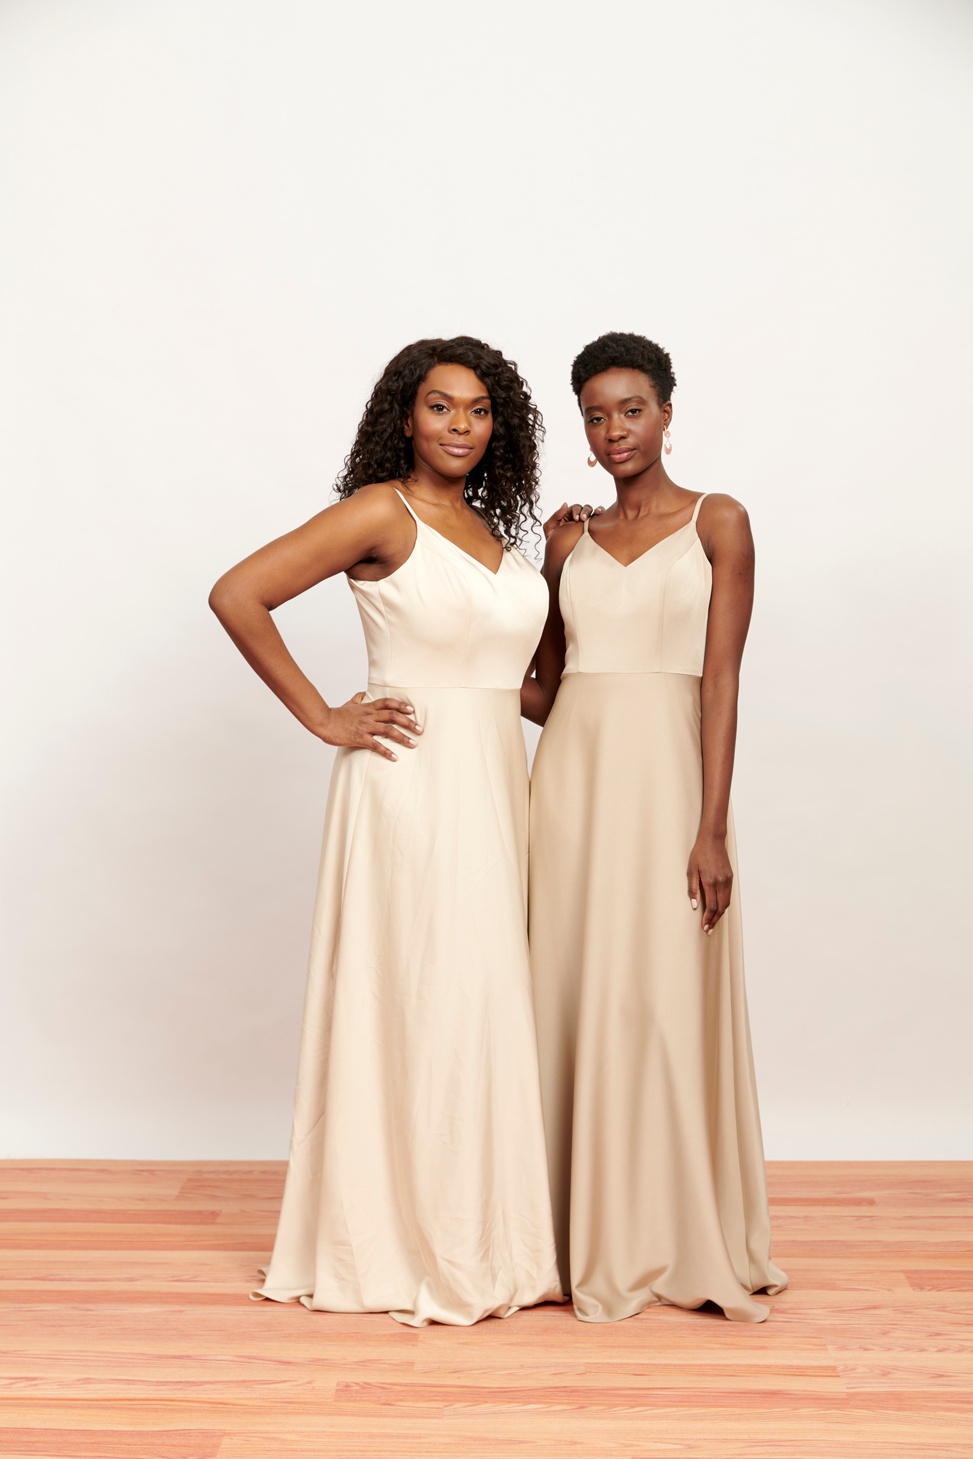 Two womxn stand in sleeveless bridesmaid dresses